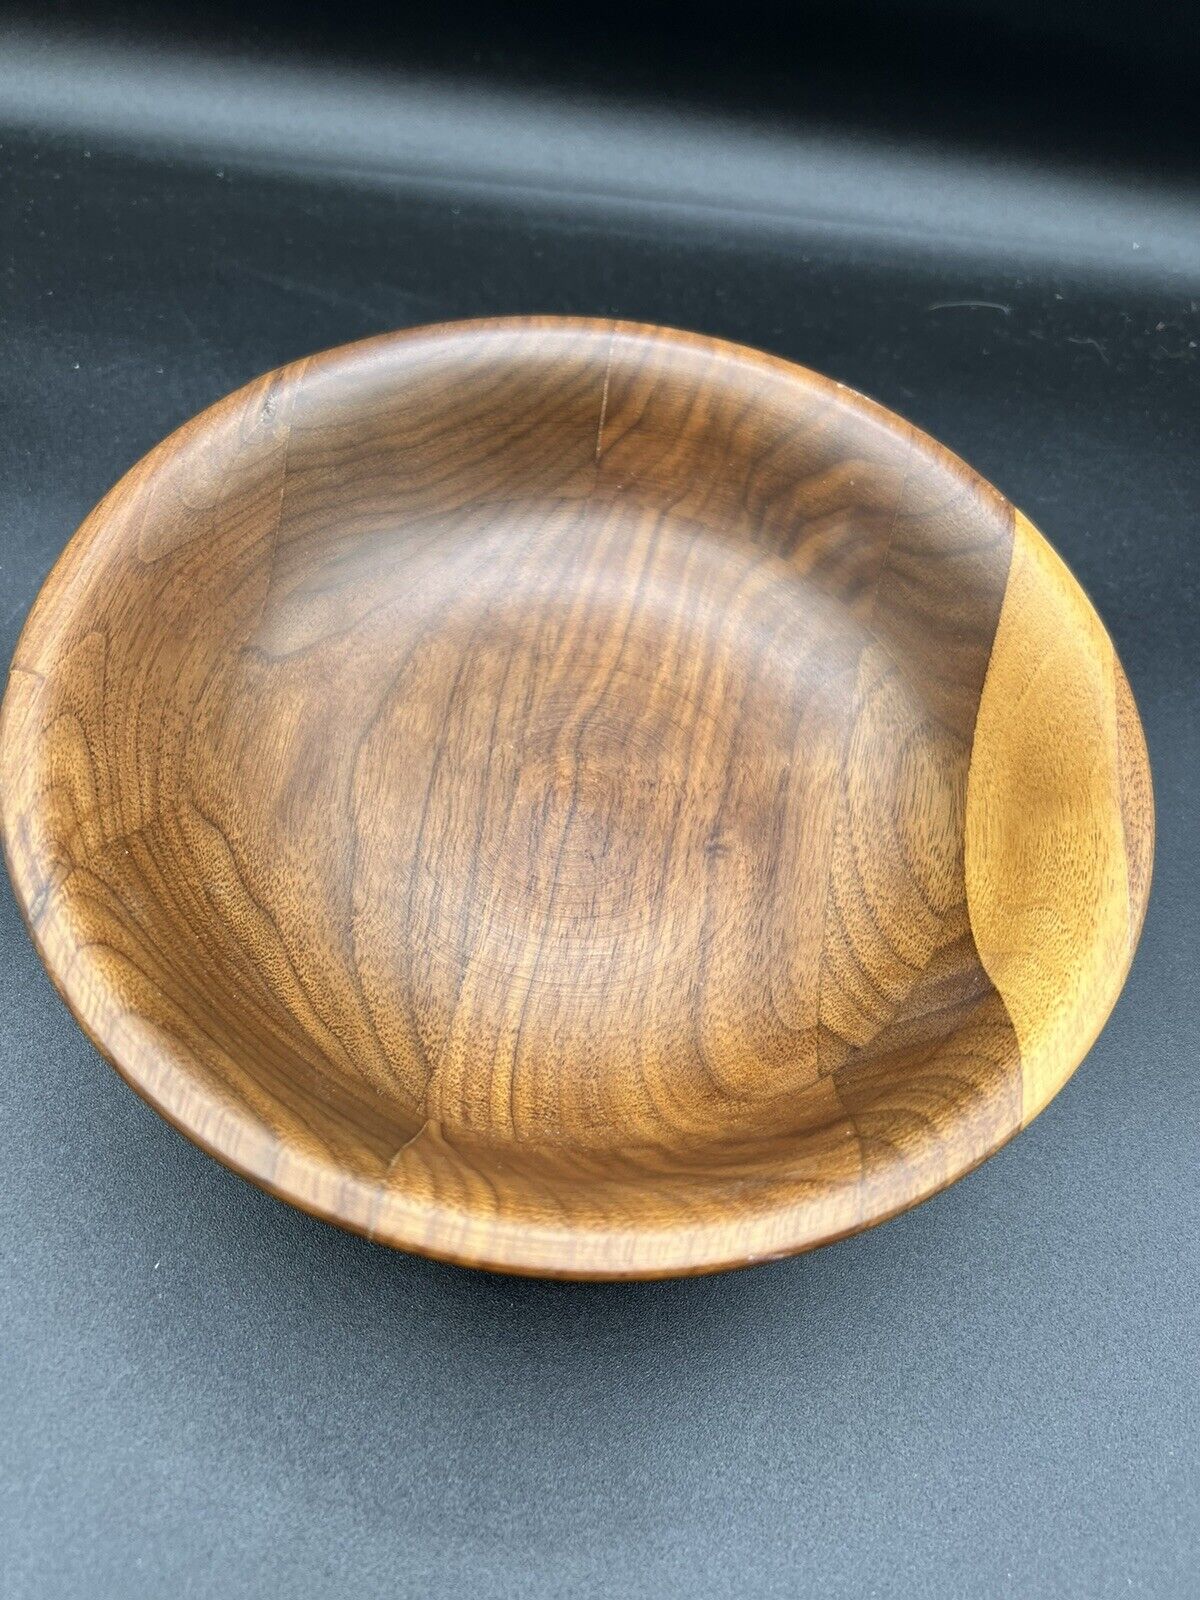 Vintage Small Wood / Wooden Bowl 7in By 2 In Trinket Decor